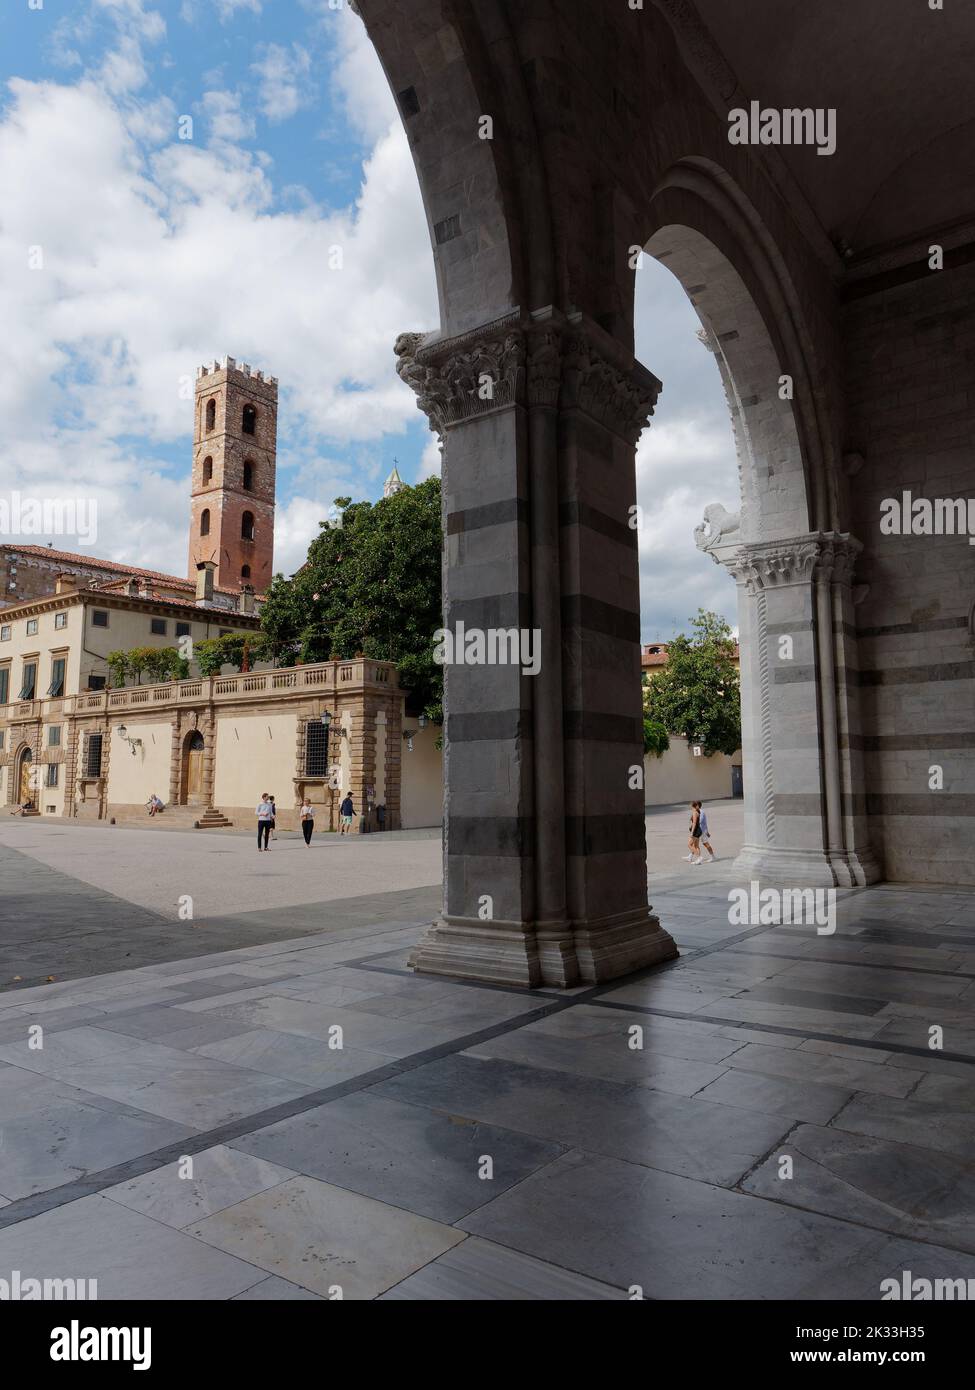 View from San Martino (St Martin) Cathedral over Piazza San Martino n Lucca, Tuscany, Italy Stock Photo